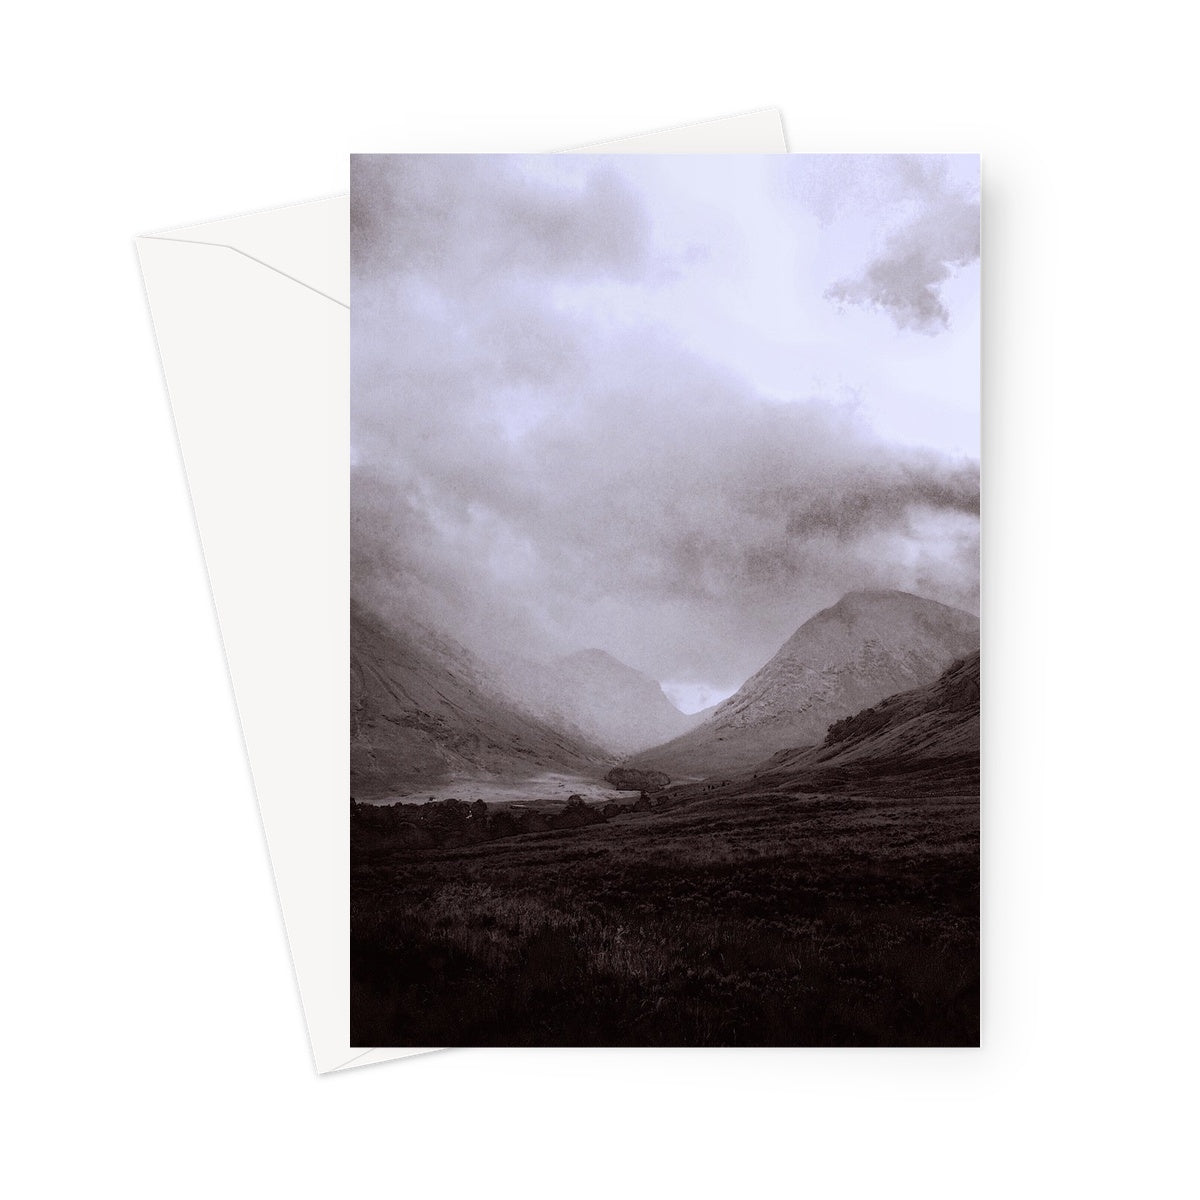 Glencoe Mist Art Gifts Greeting Card-Greetings Cards-Glencoe Art Gallery-5"x7"-1 Card-Paintings, Prints, Homeware, Art Gifts From Scotland By Scottish Artist Kevin Hunter